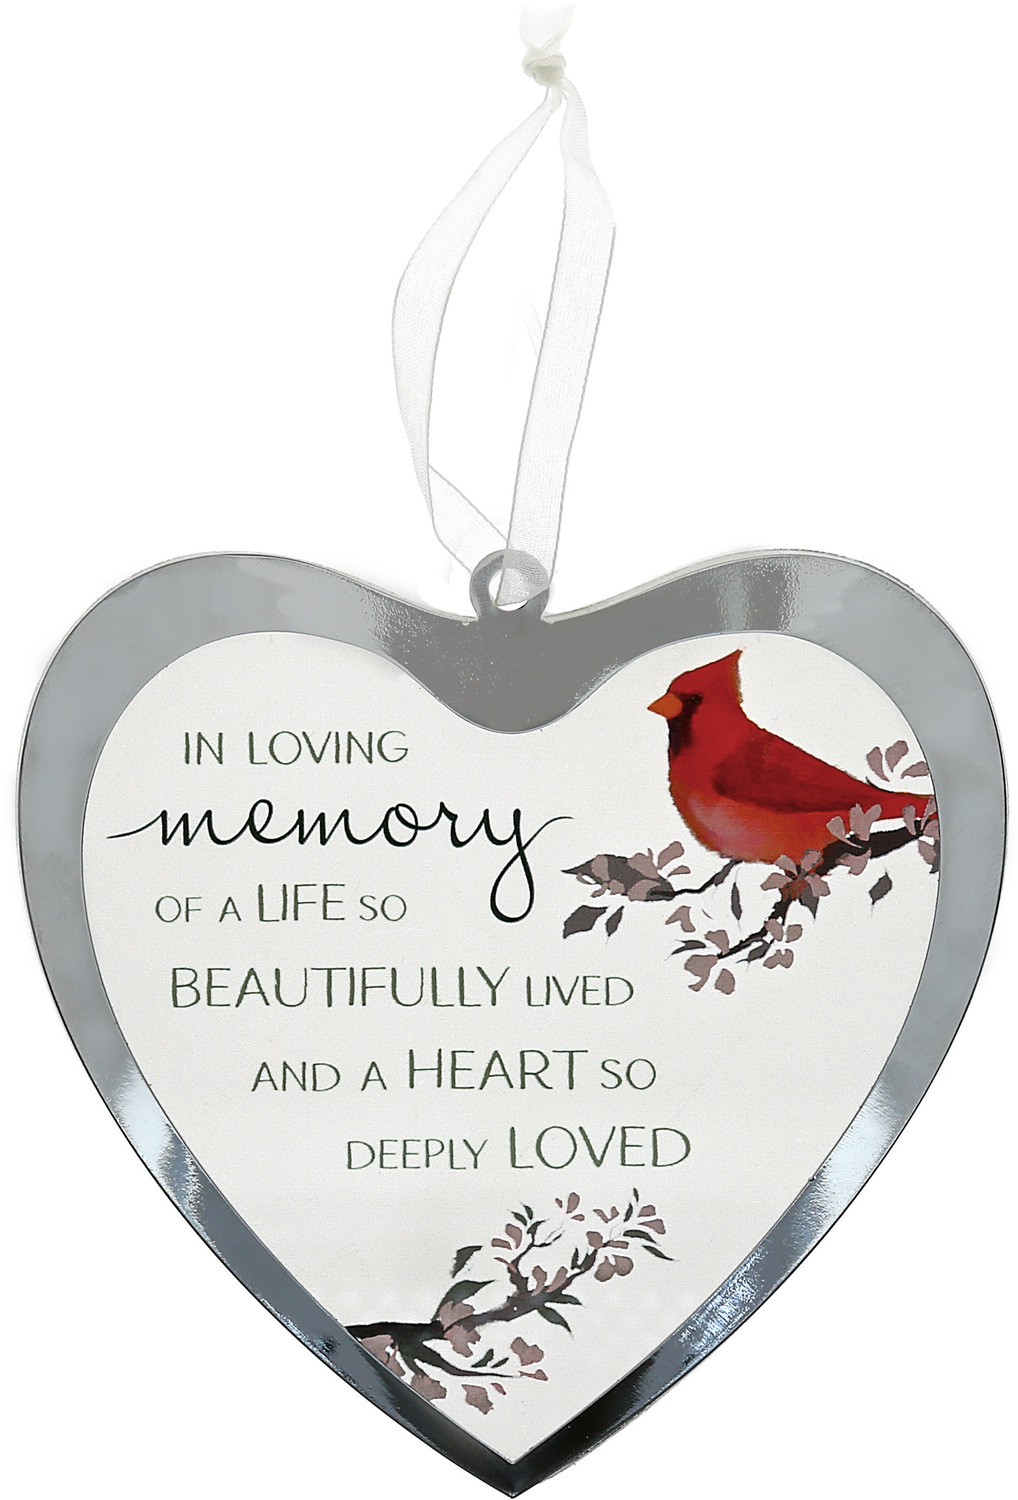 In Loving Memory by Always by Your Side - In Loving Memory - 4.75" Mirrored Glass Ornament